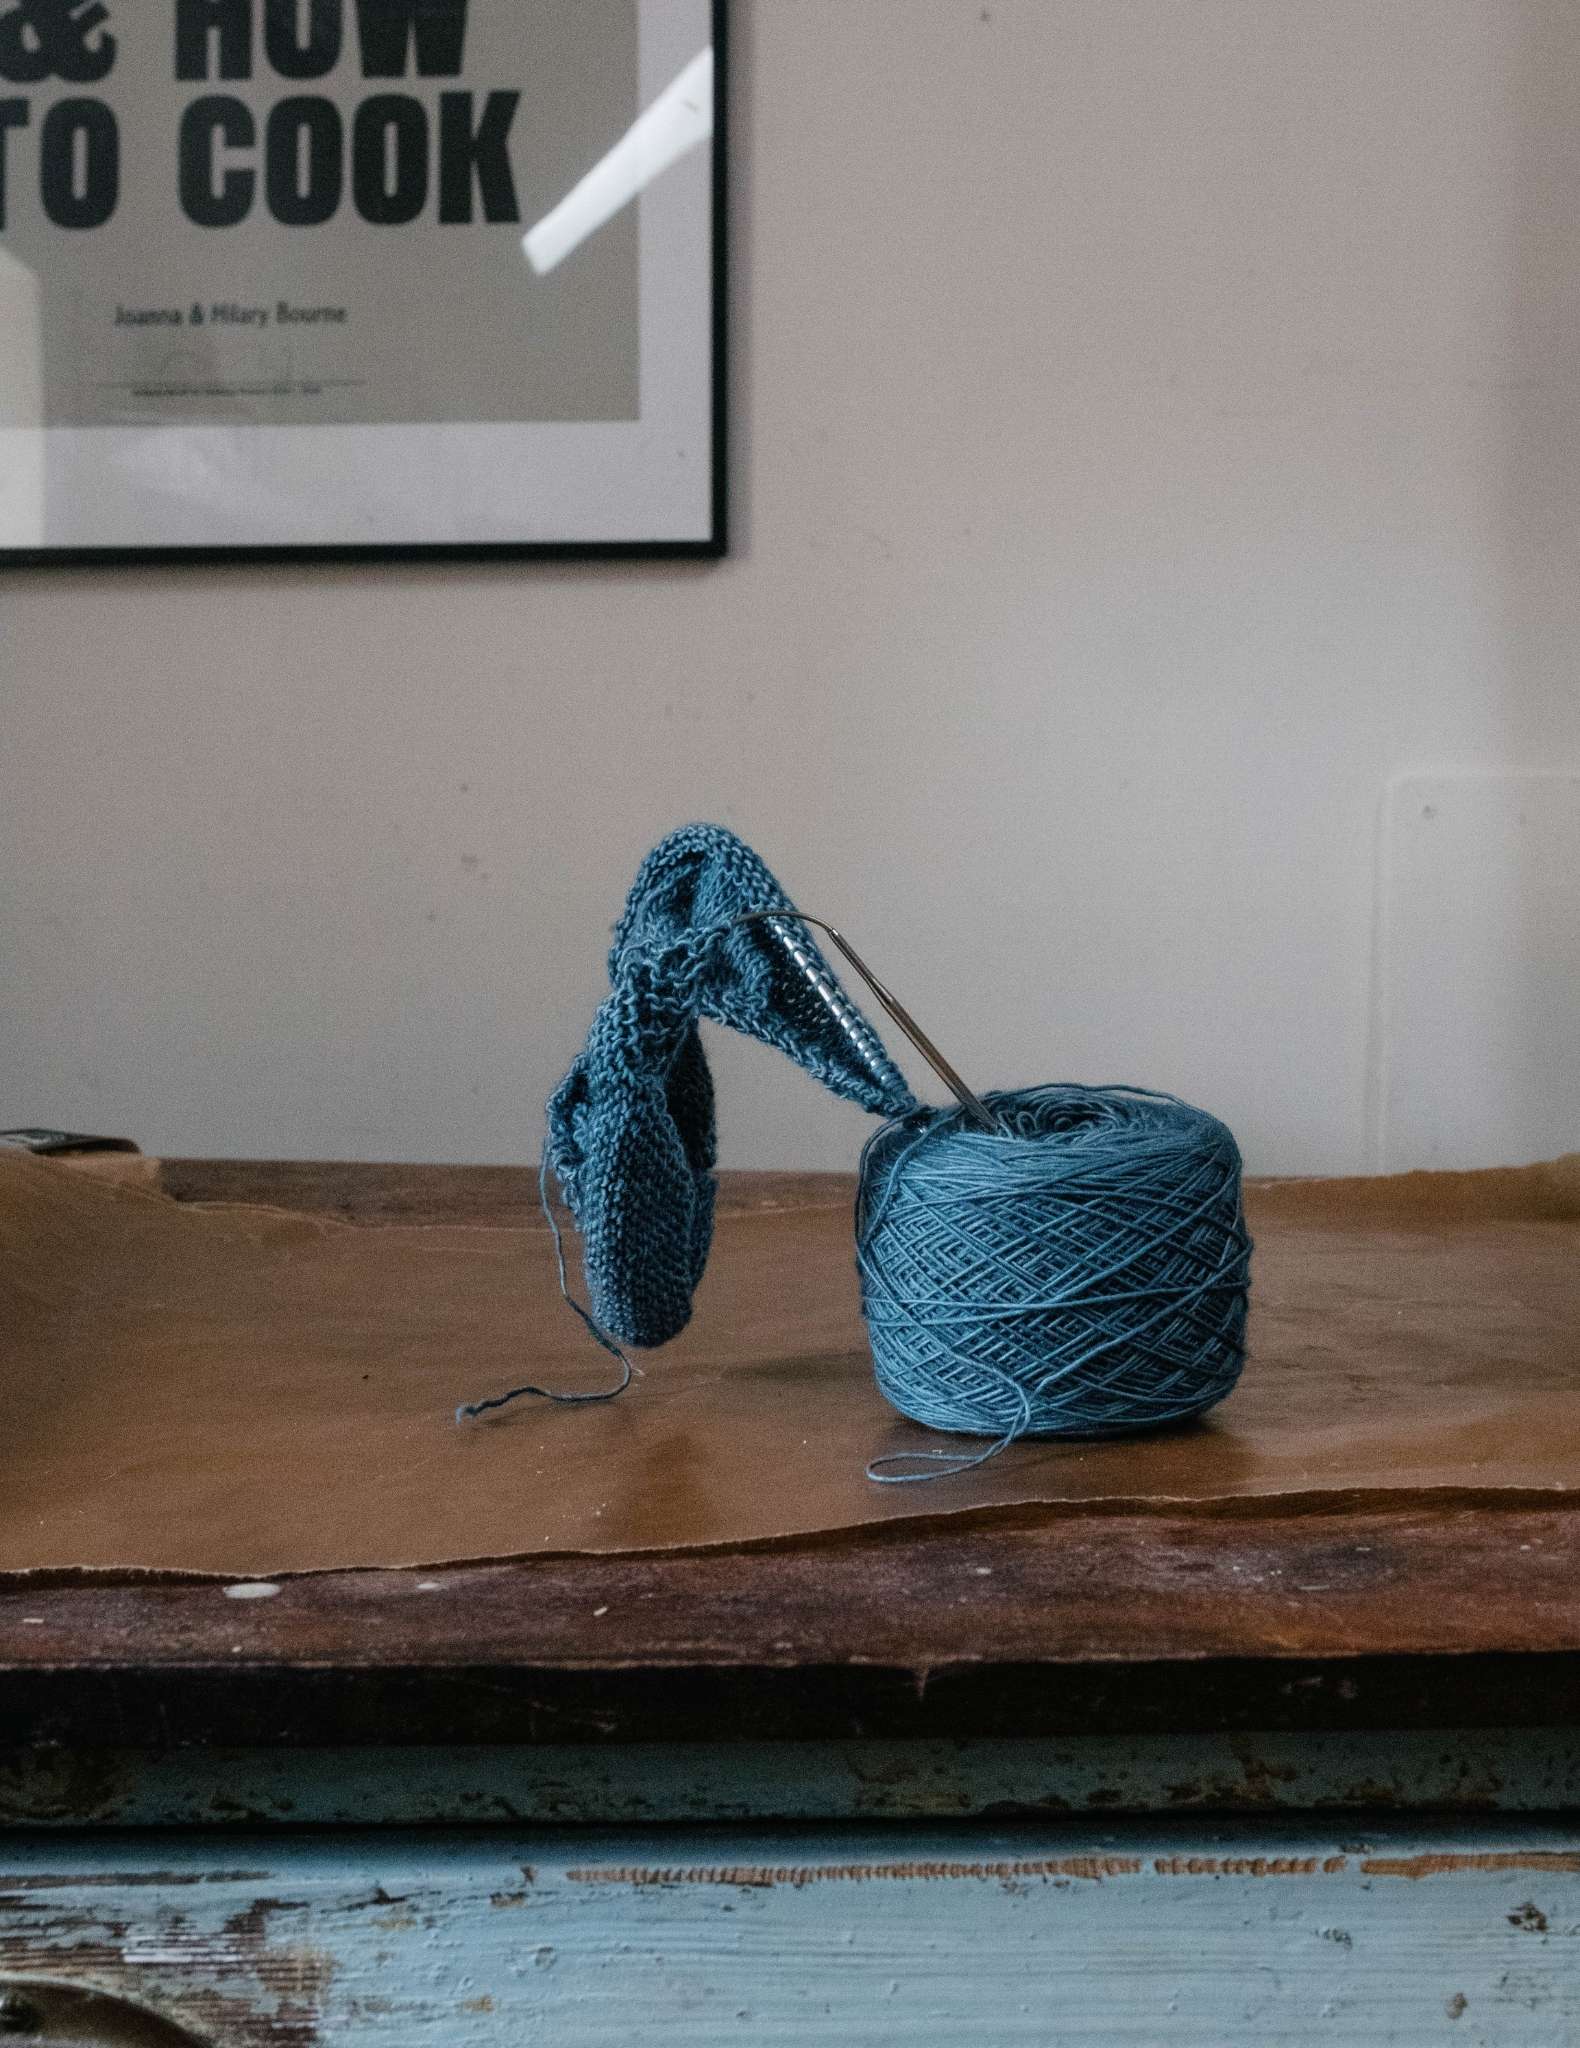 A ball of blue yarn with a project on the needles sticking out of the top of it, sitting on a wooden surface in front of a wall with an art print.